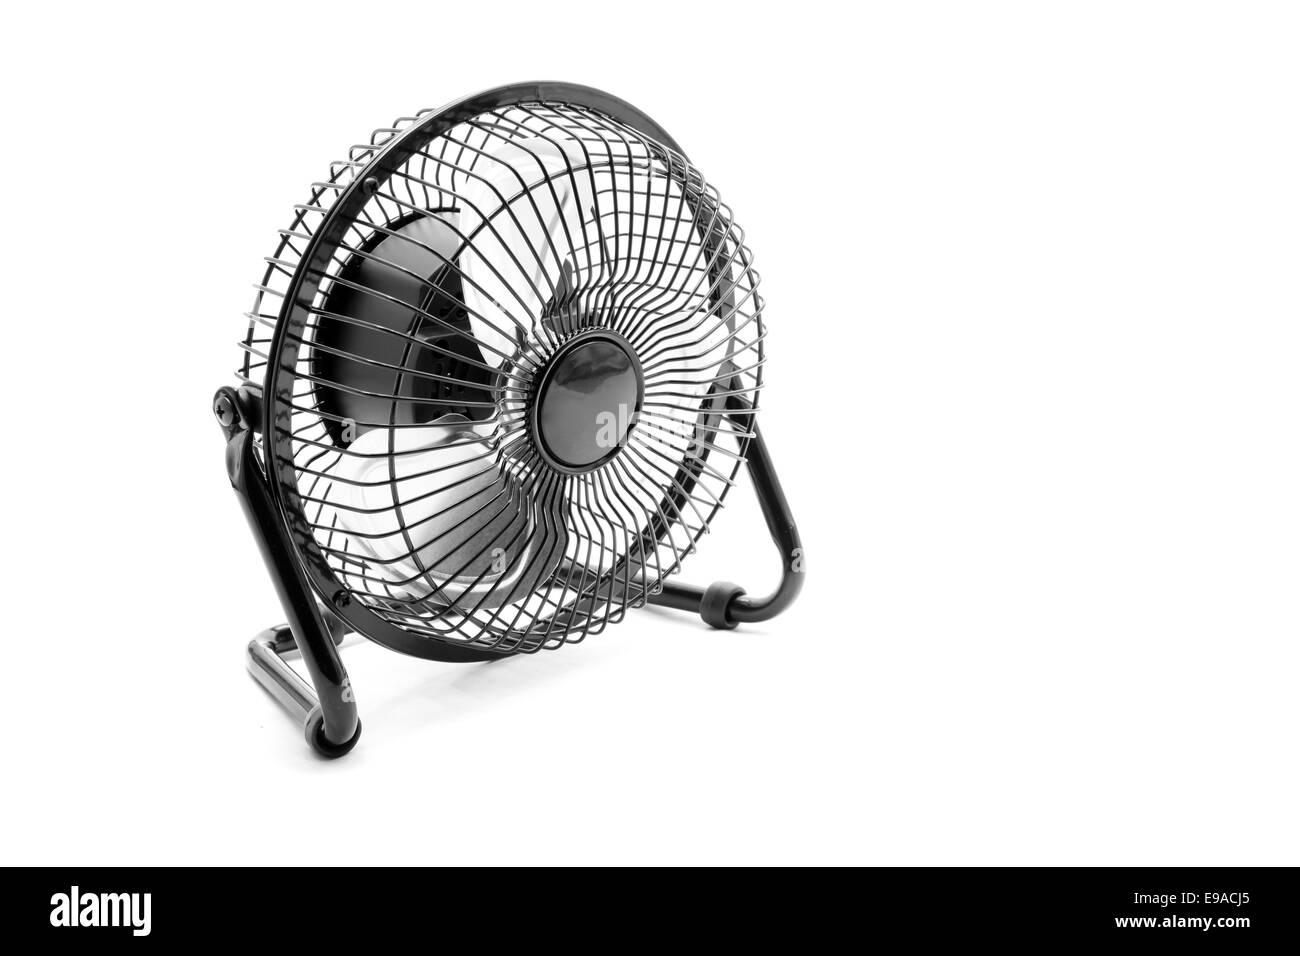 Wall Fan Black and White Stock Photos & Images - Alamy